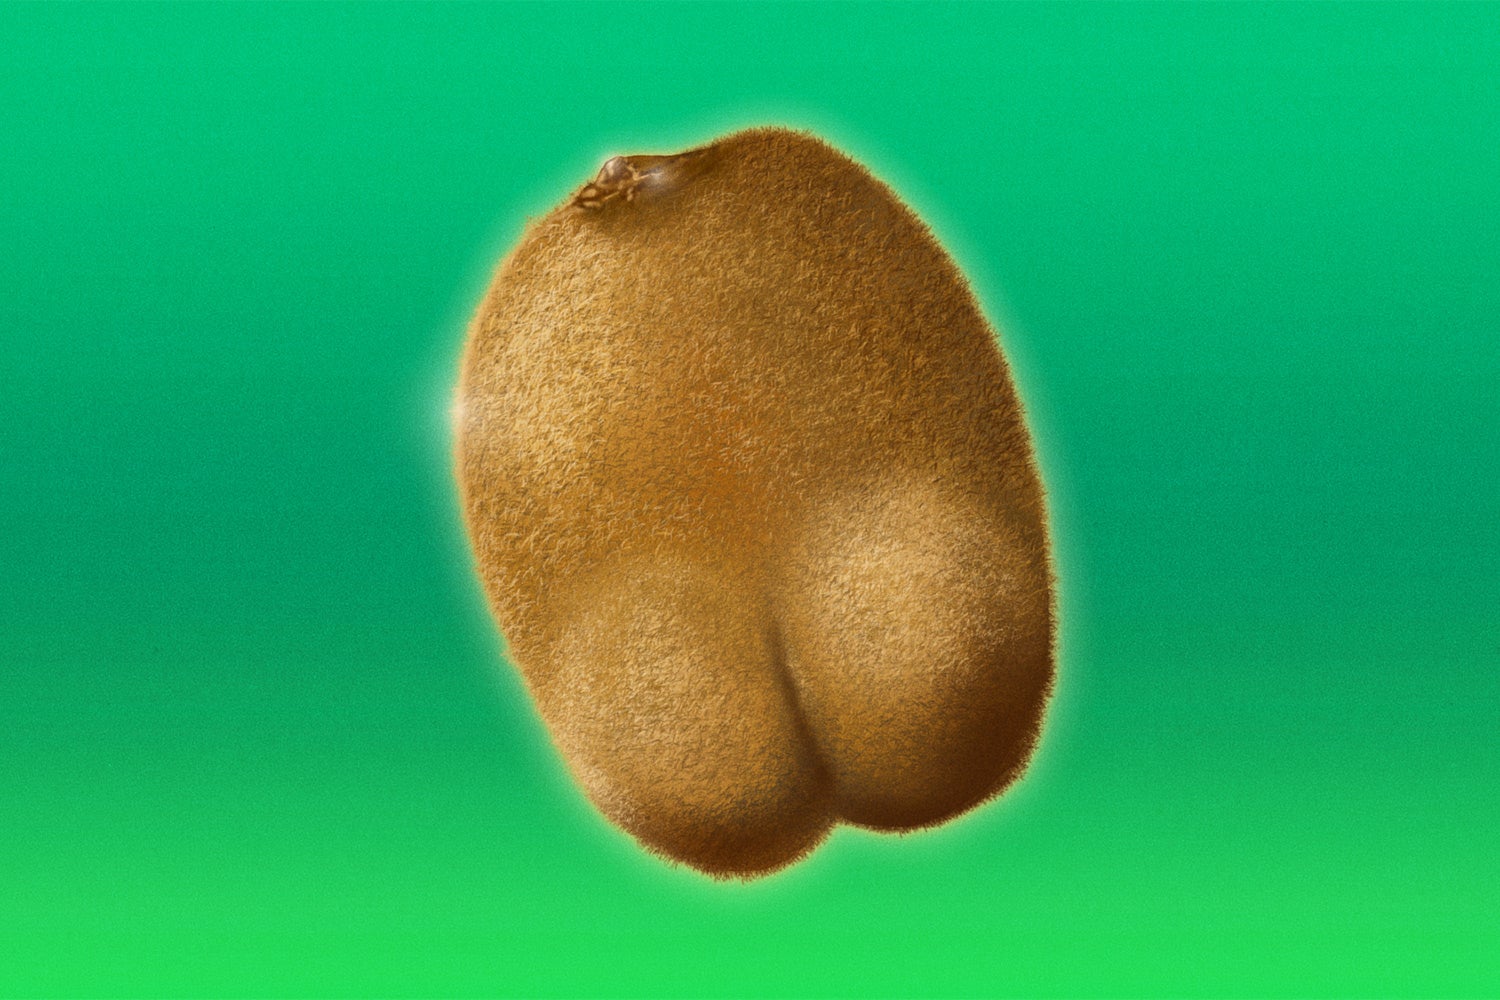 Brown fuzzy kiwi shaped like a butt on a green ombre background